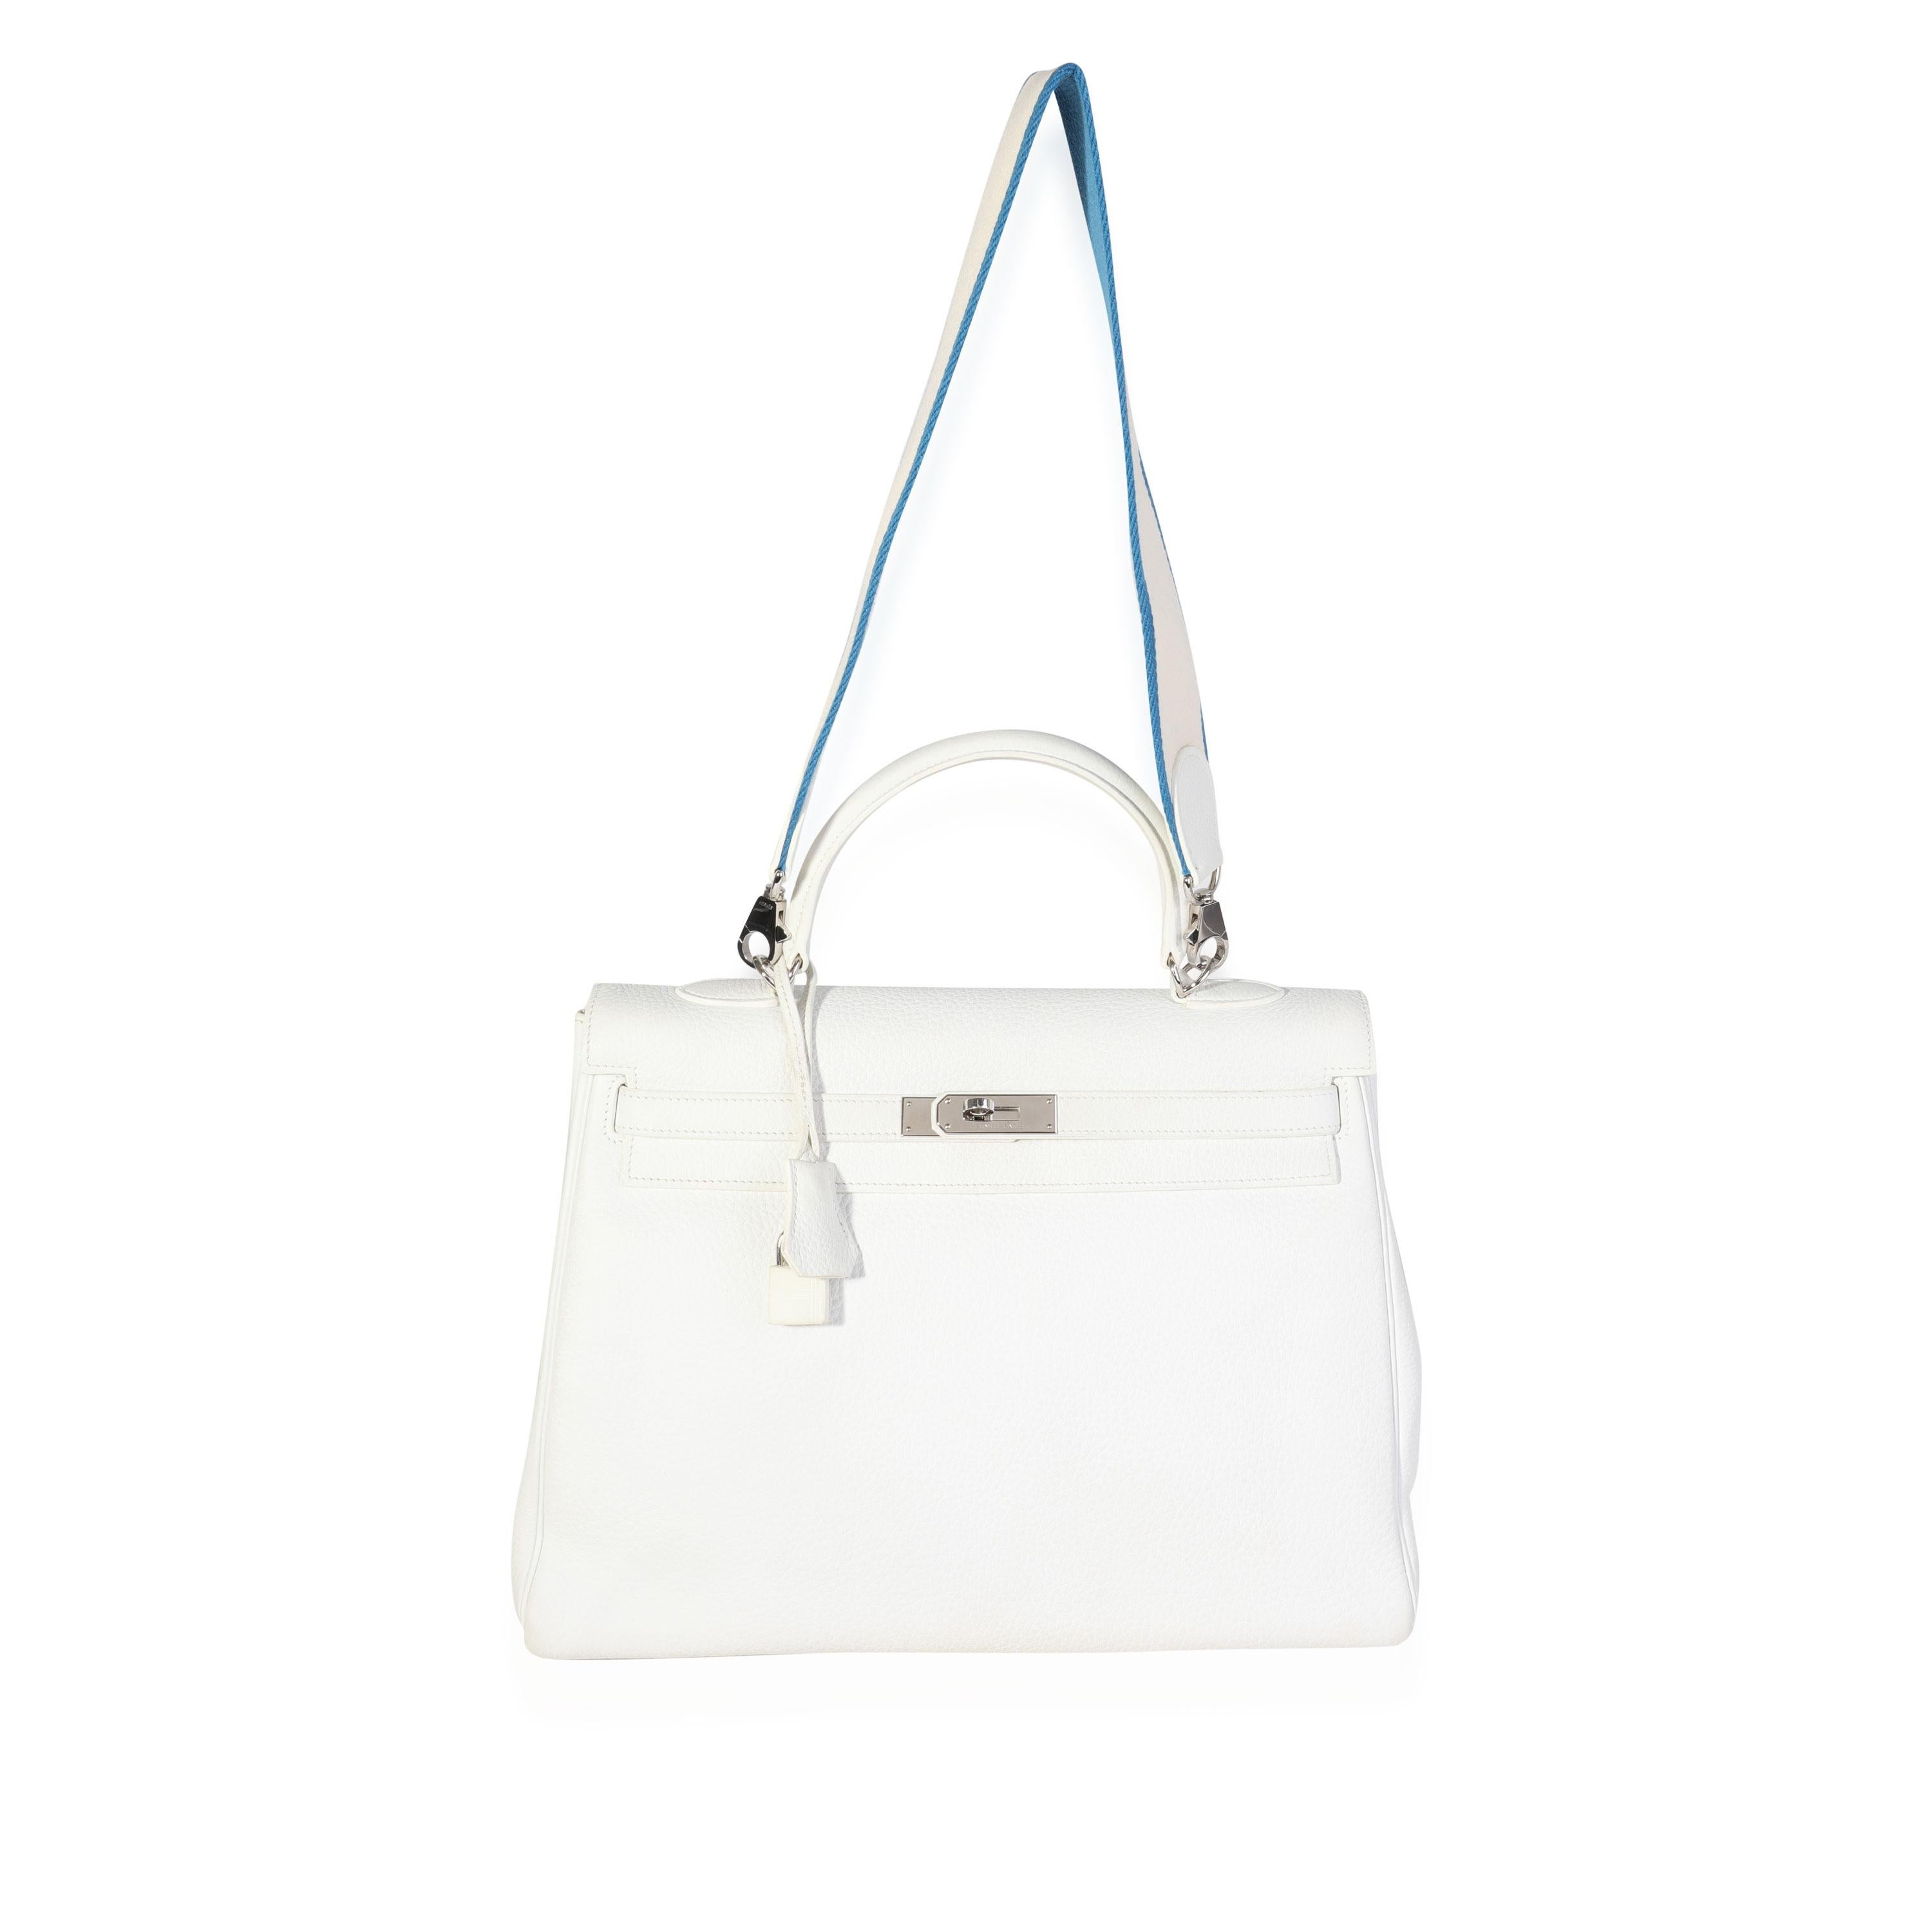 Listing Title: Hermès White Togo Retourne Kelly 35
SKU: 119805

Handbag Condition: Very Good
Condition Comments: Very Good Condition. Scuffing to corners. Discoloration throughout leather. Scratching to hardware. Scuffing and discoloration to lock.